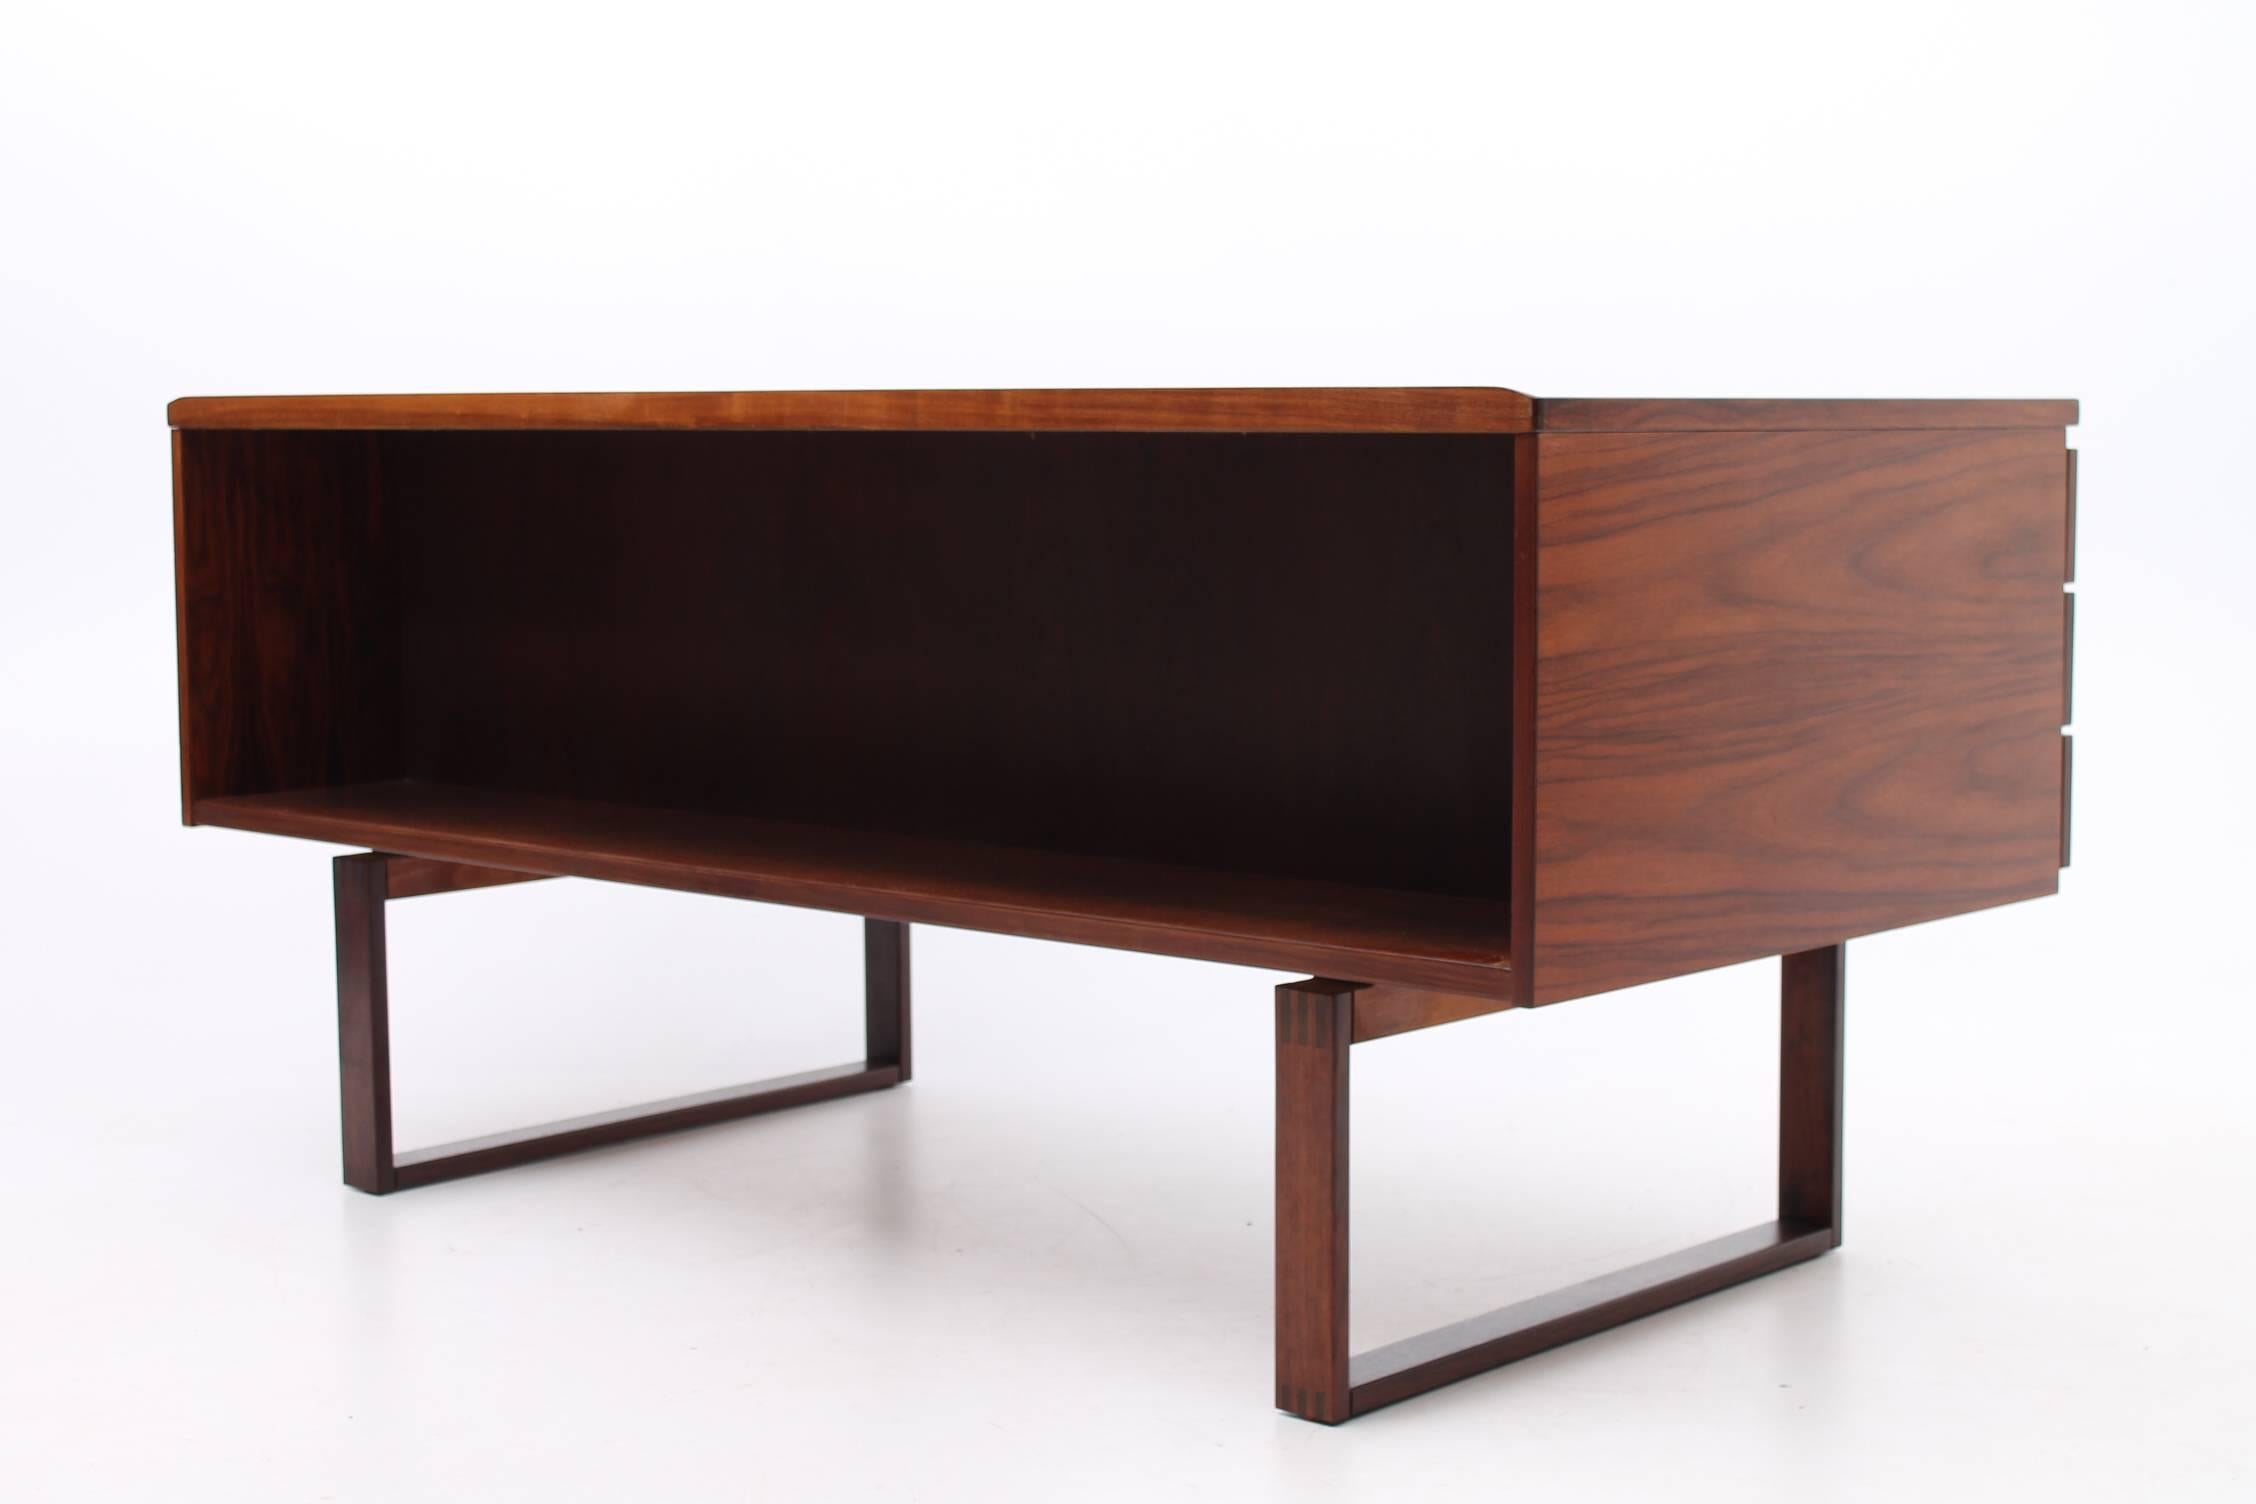 Gorgeous desk made out of rosewood and designed by Preben Schou Andersen for PSA Furniture. This desk features three drawers on either side of the opening as well as a large open shelf on the backside to display books, awards and personal